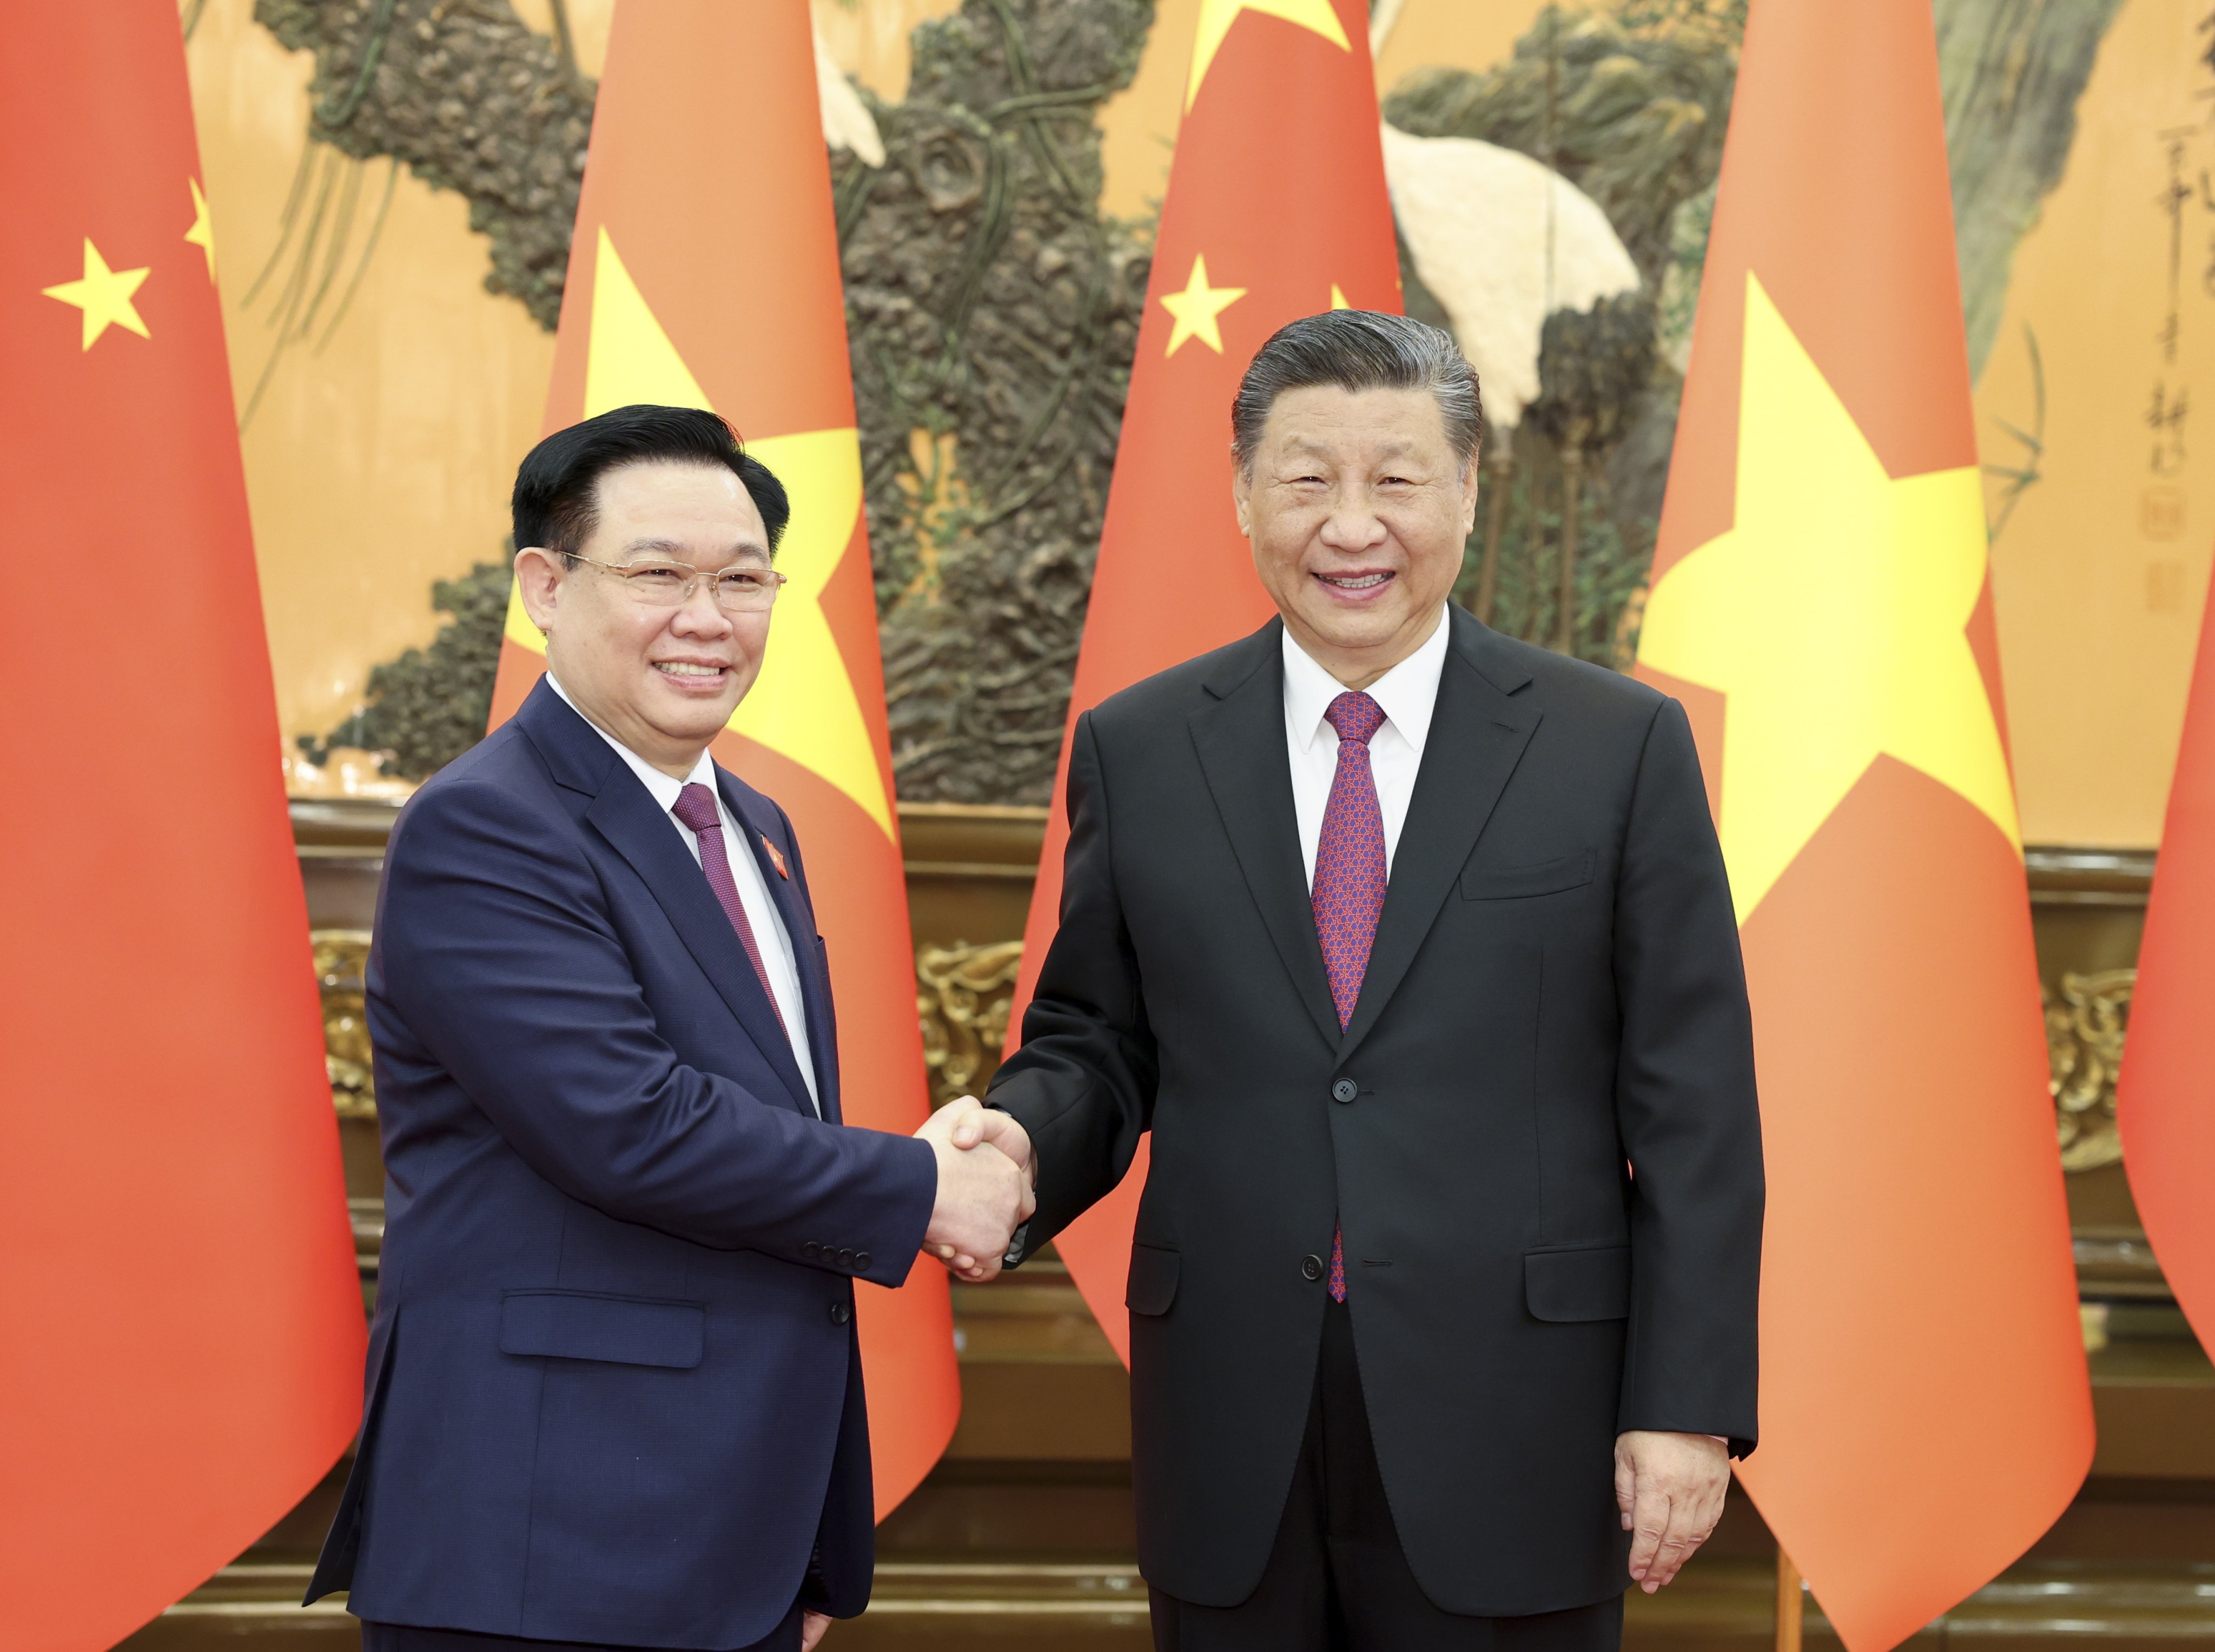 Vietnam’s Vuong Dinh Hue (left) meets Chinese President Xi Jinping in Beijing on April 8. Weeks later, Hue was removed as chairman of the National Assembly of Vietnam, putting a dent in rare earth negotiations. Photo: EPA-EFE/Xinhua